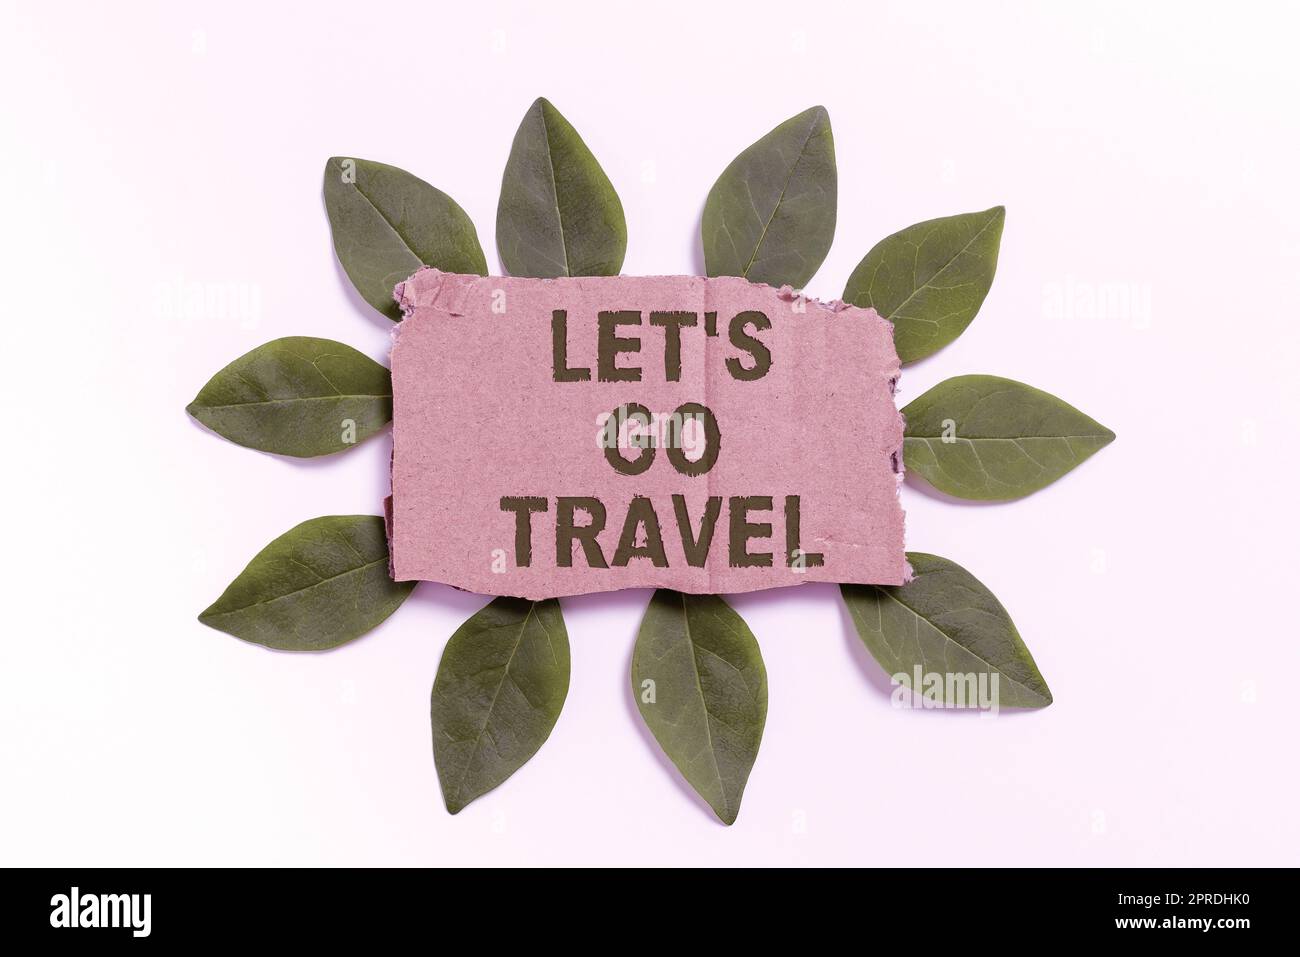 Sign displaying Let S Is Go Travel. Business approach Plan a trip visit new places countries cities adventure Blank Cardboard Paper Surrounded With Leaves For Invitation Card. Stock Photo